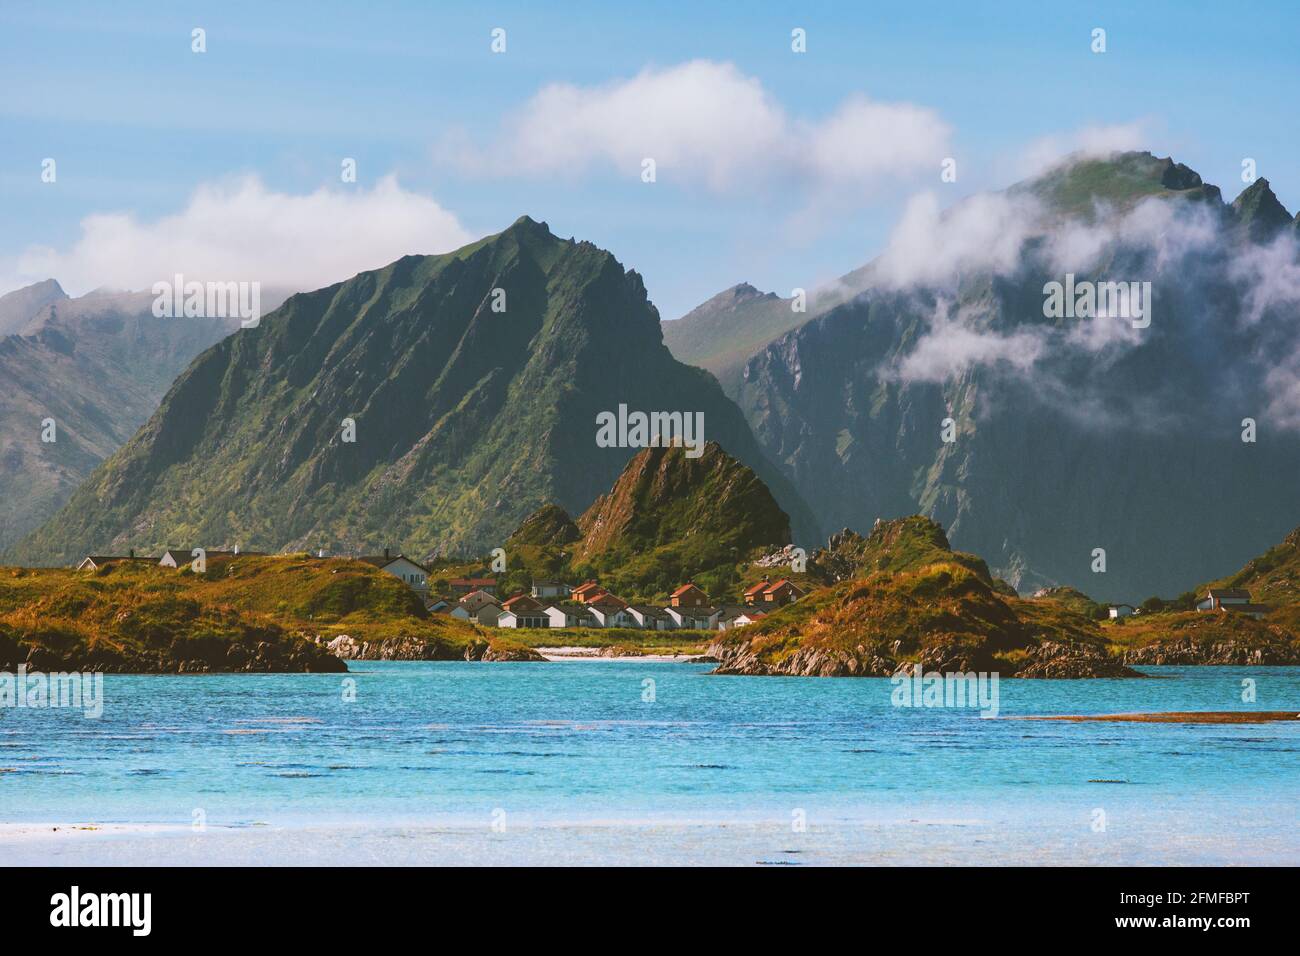 Norway landscape mountains and ocean Andenes city view summer travel destinations nature scenery Vesteralen islands Stock Photo